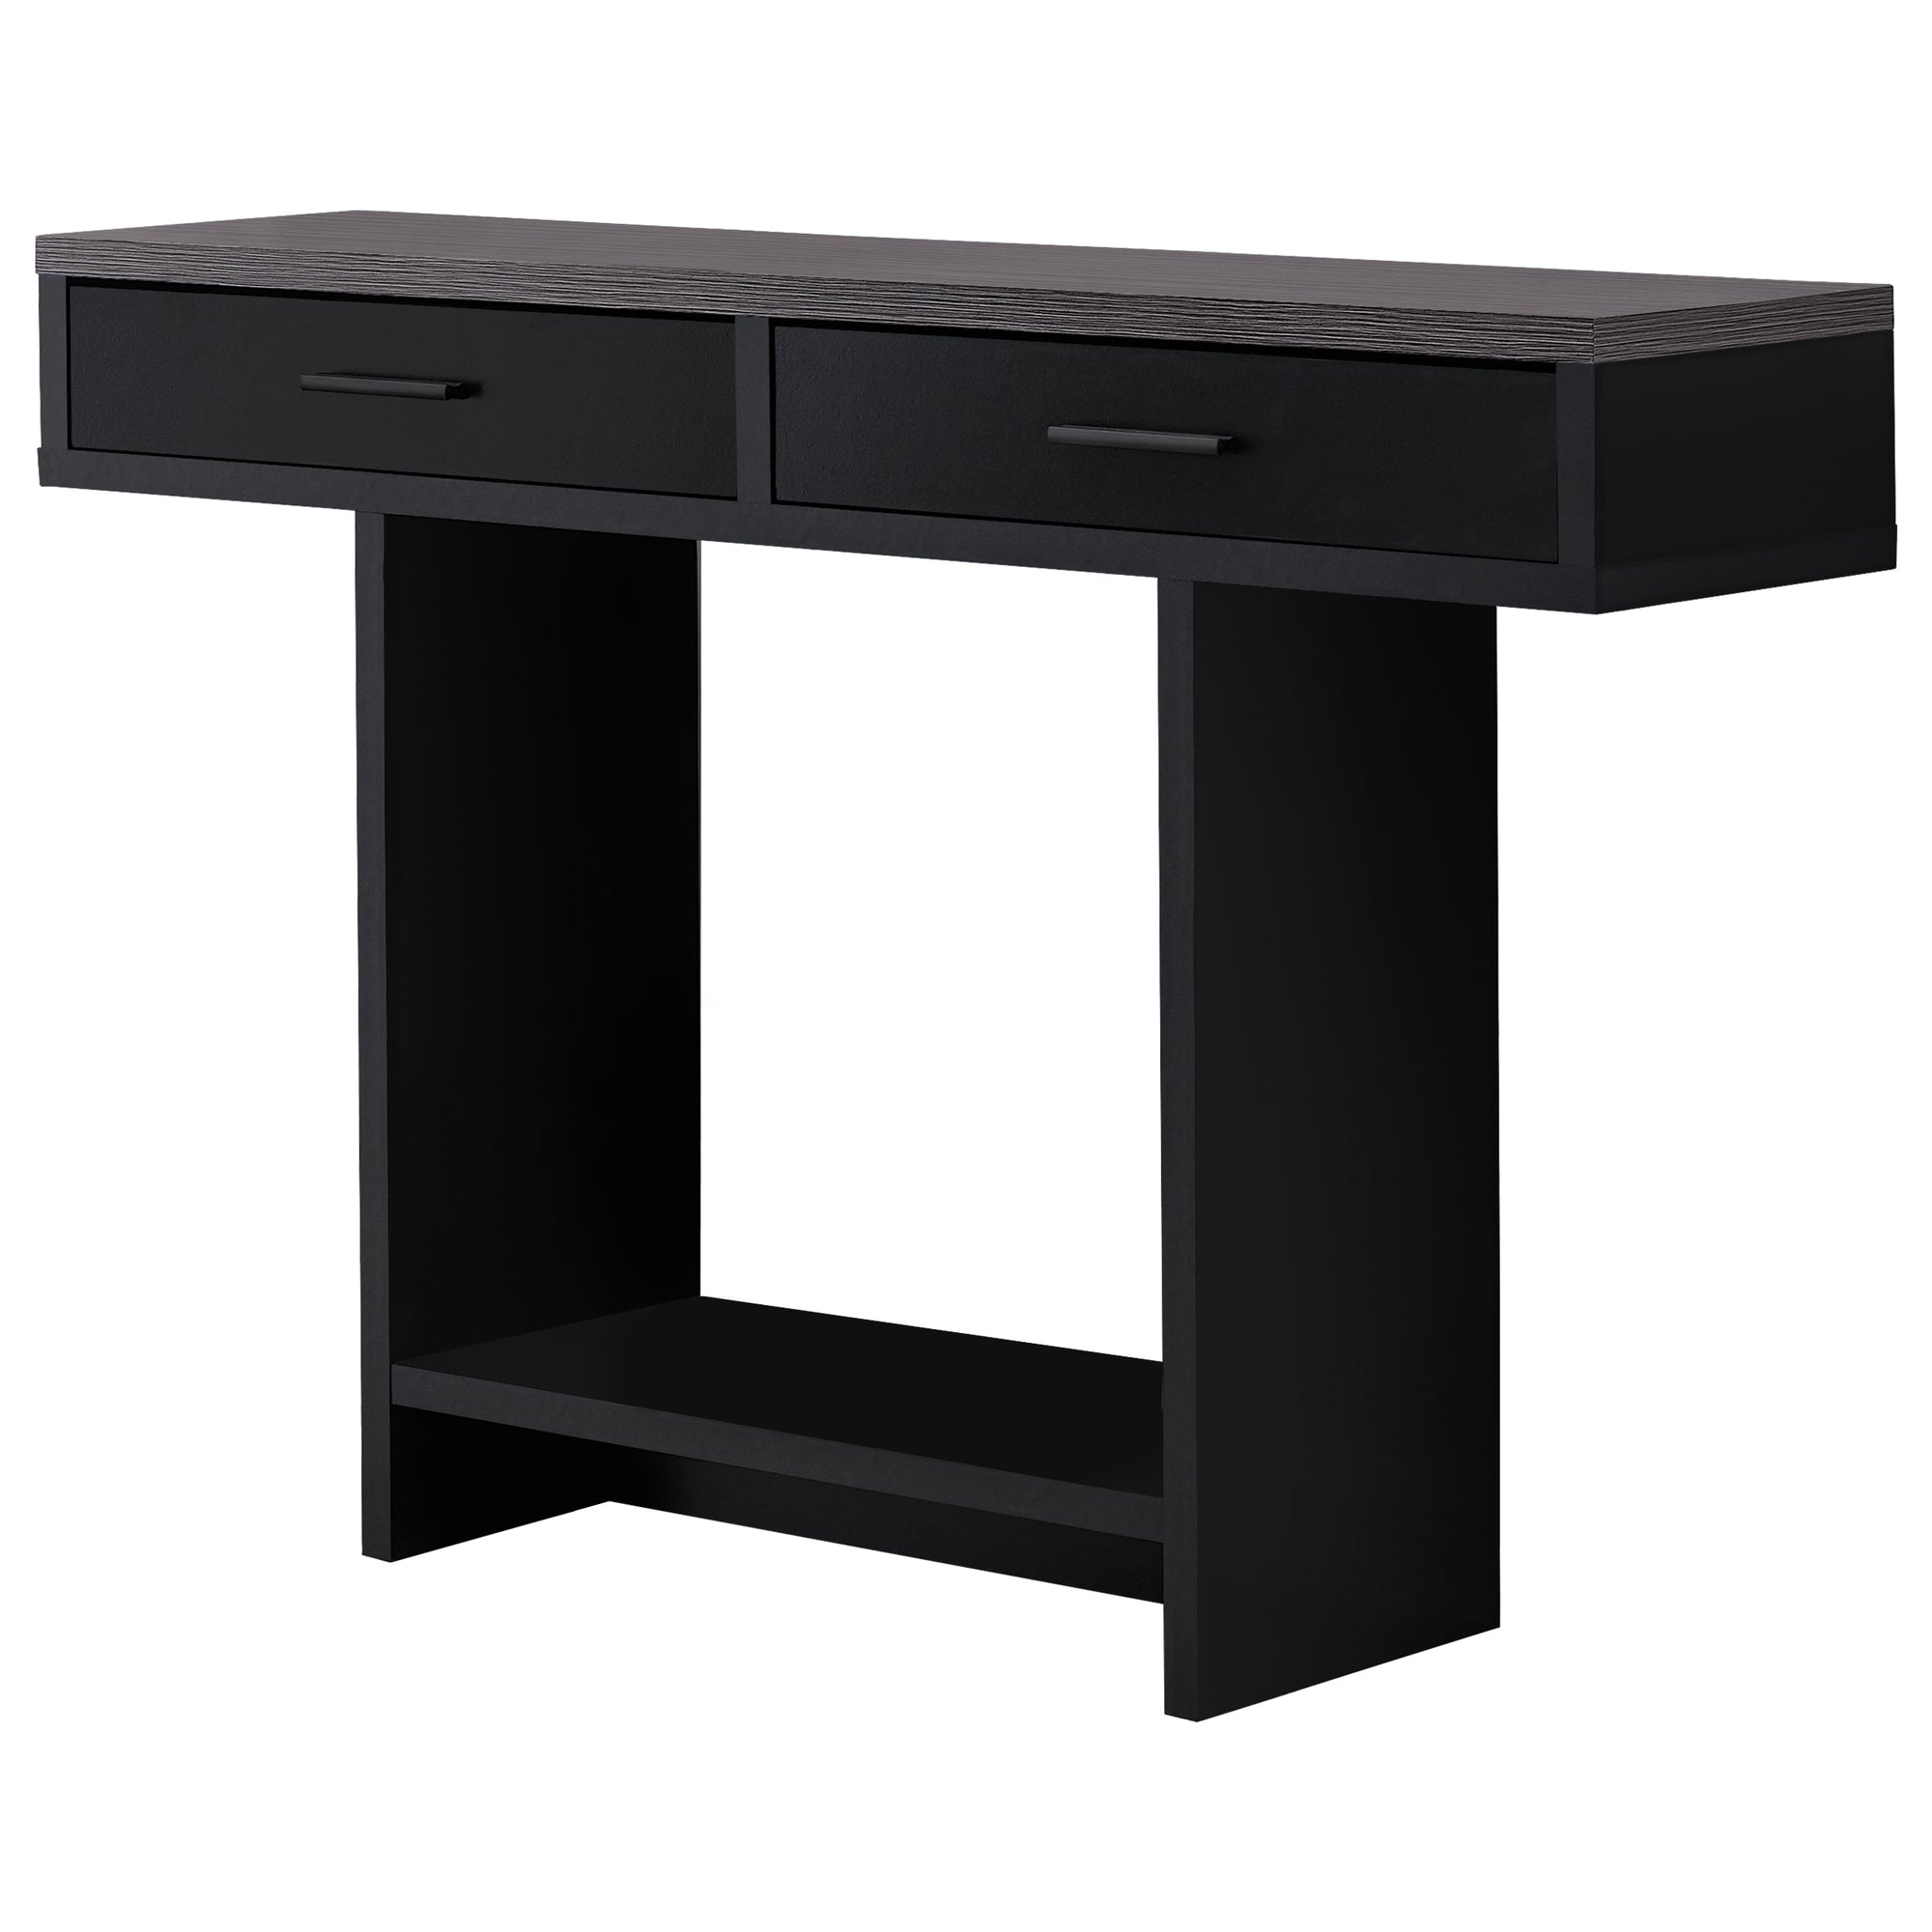 12.25" x 47.25" x 32" Black/Grey With Drawers - Accent Table